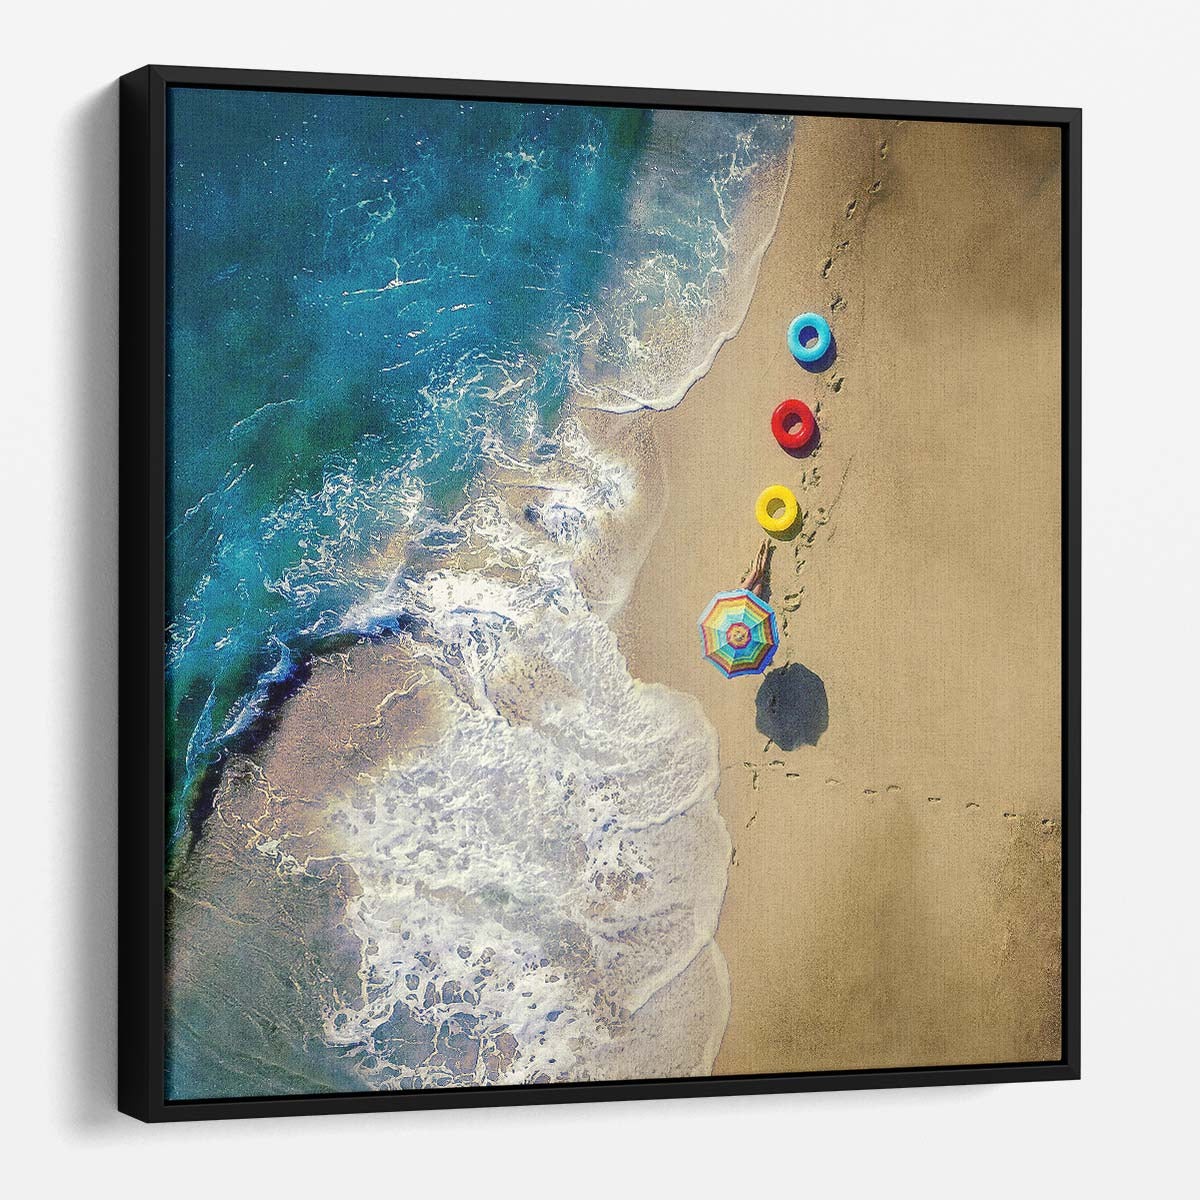 Vibrant Summer Beach Aerial View Wall Art by Luxuriance Designs. Made in USA.